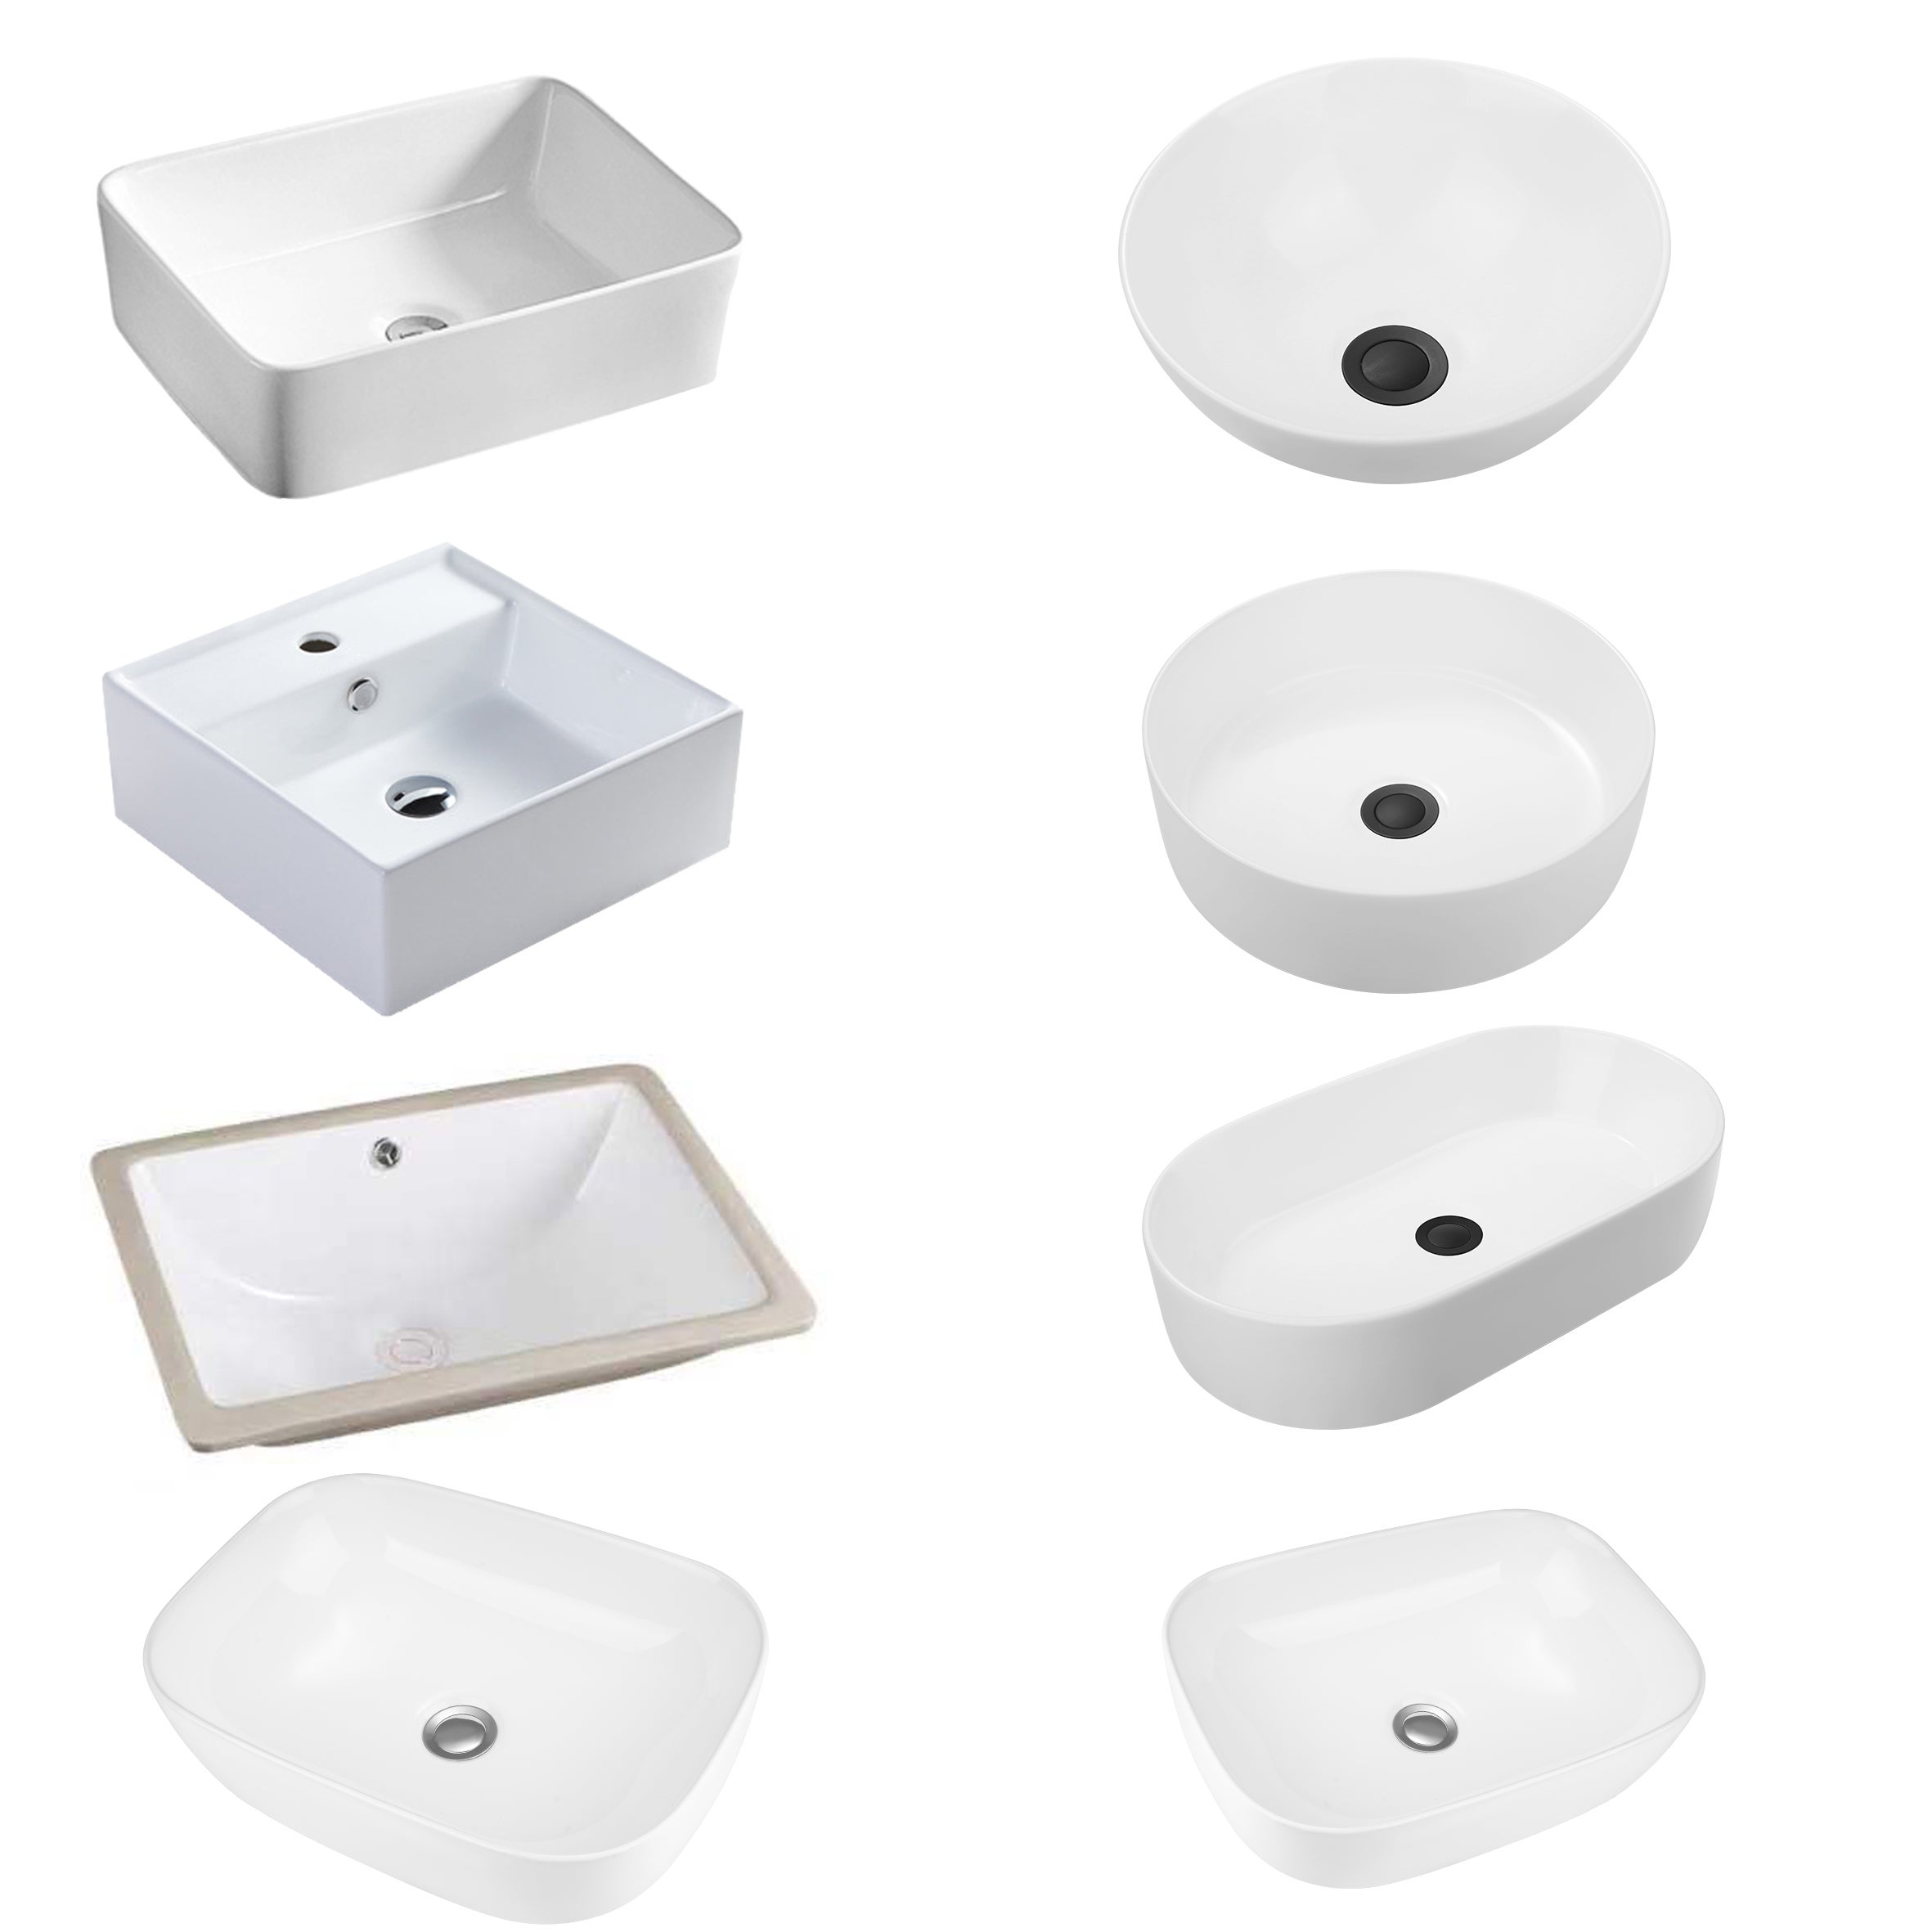 Bathroom Ceramic Basin Above Counter Top Wash Bowl Vanity Sink White Round Square Oval